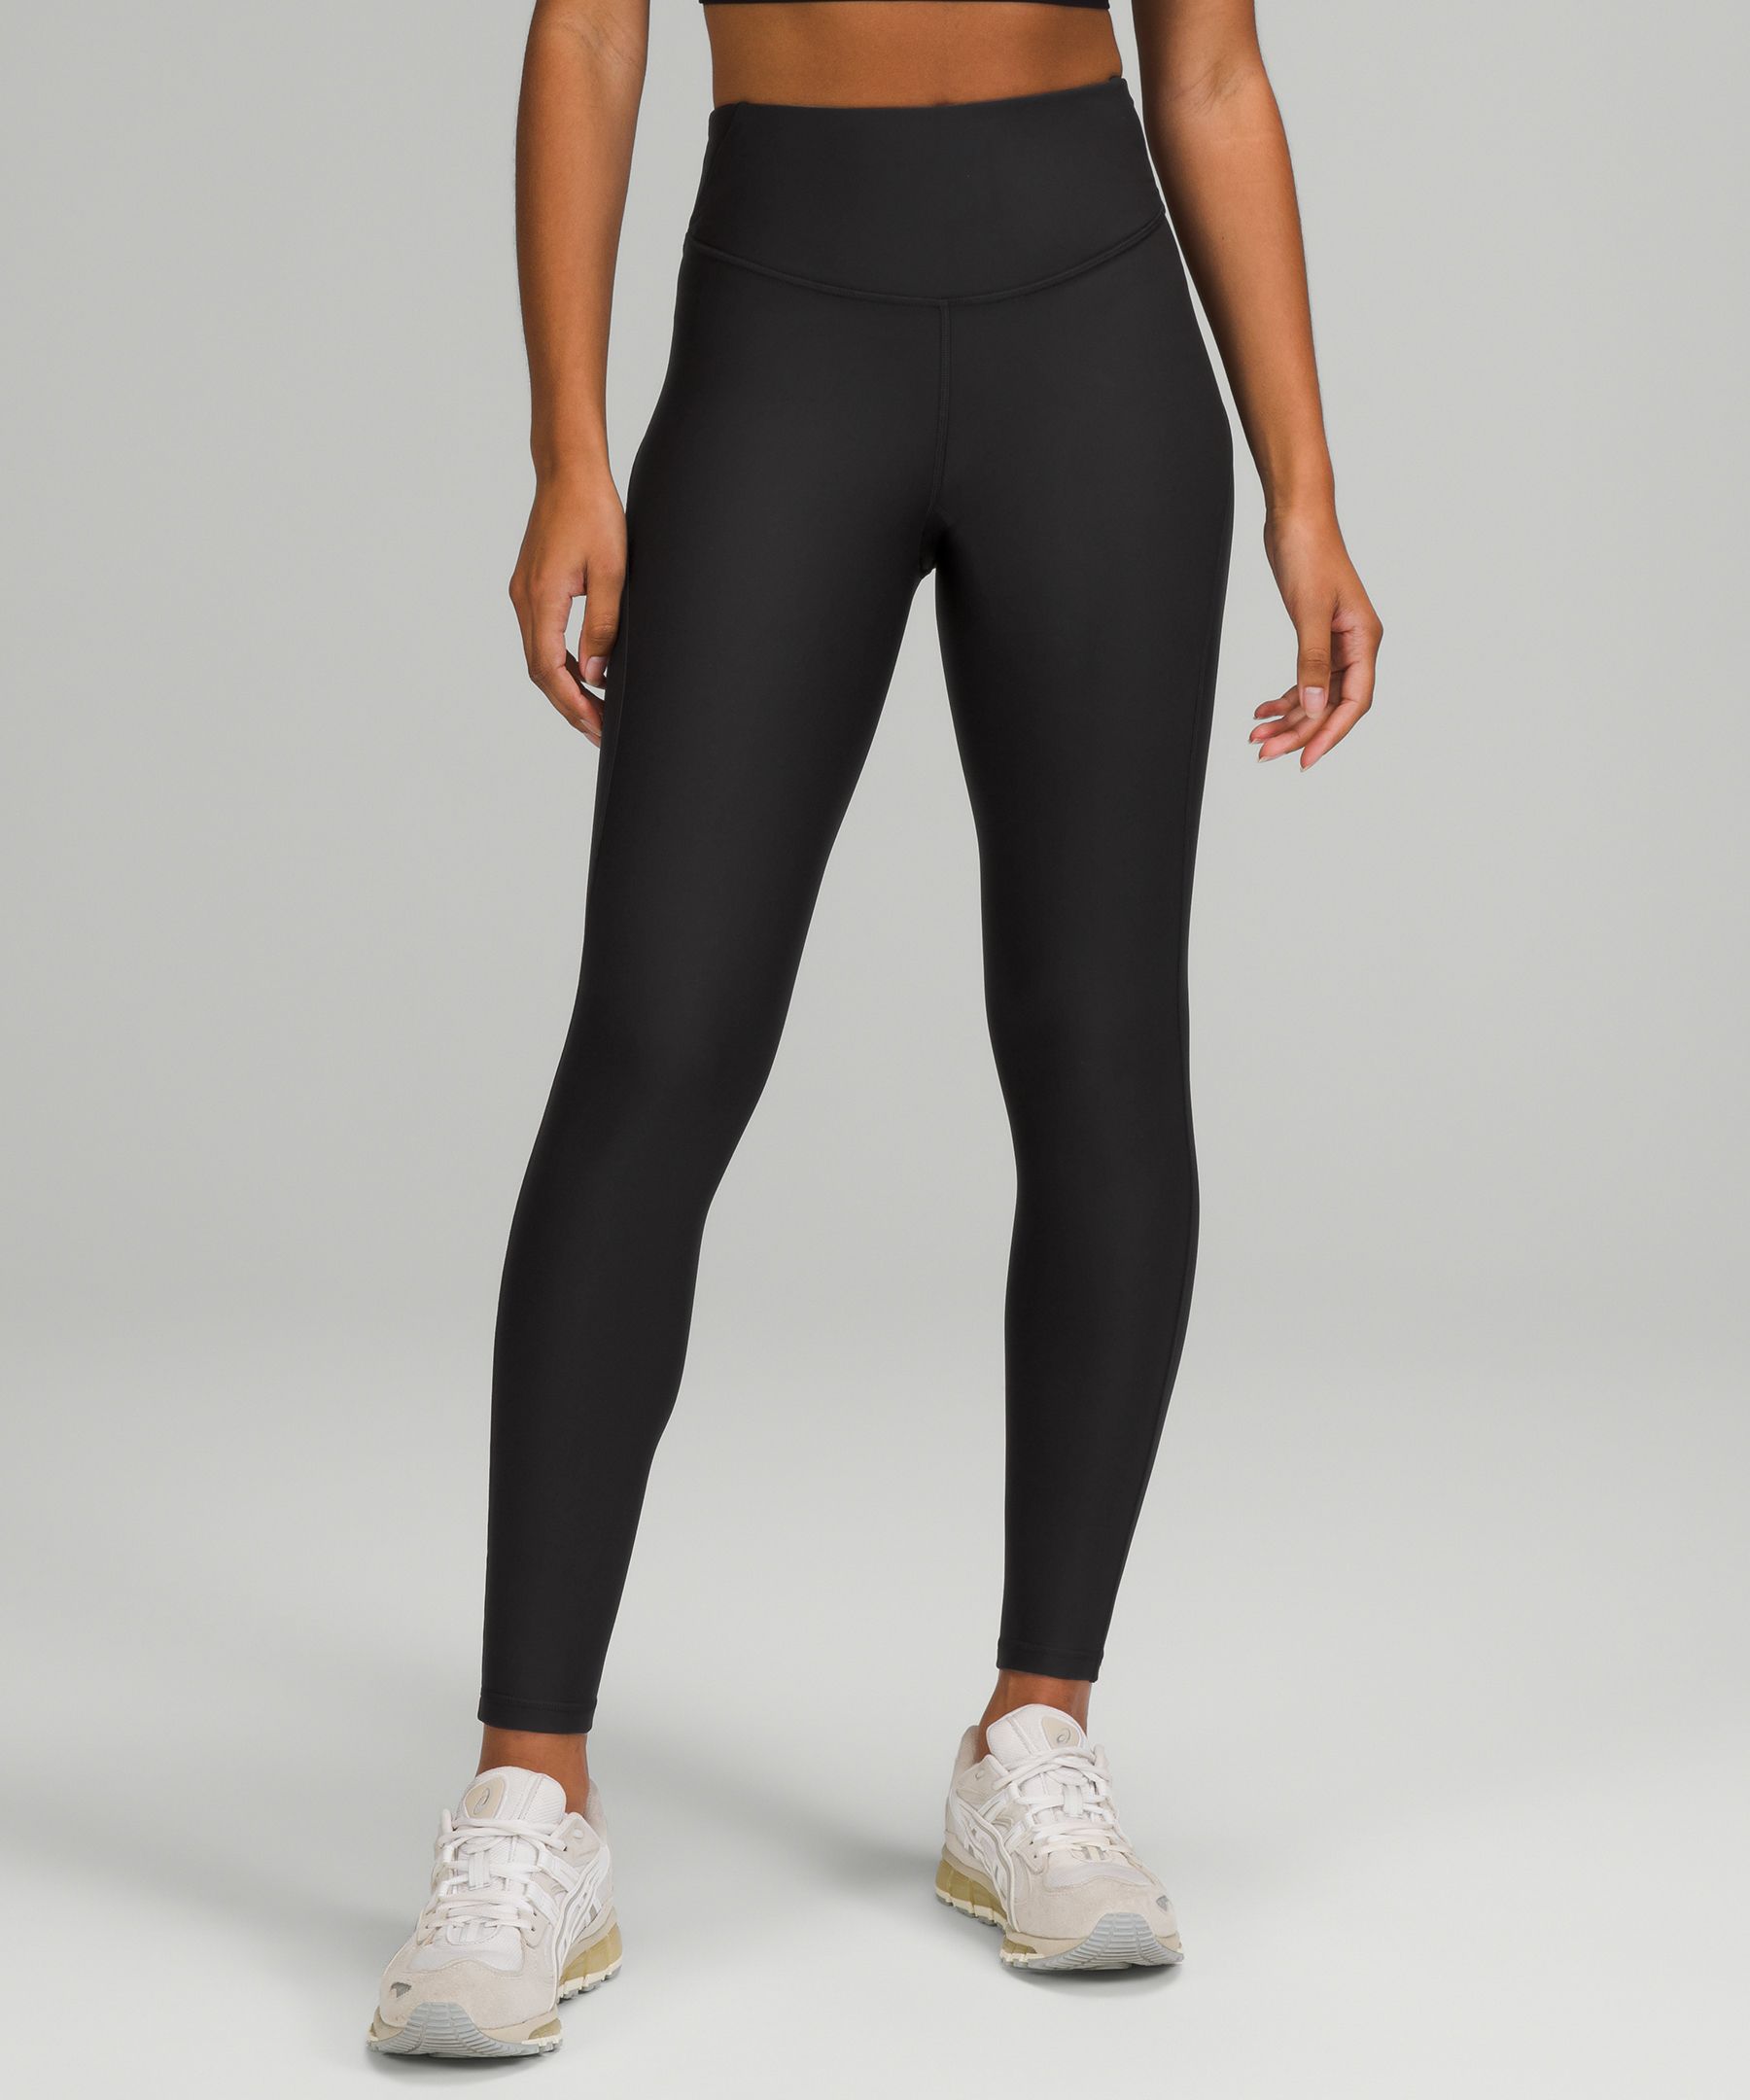 Runners say these Lululemon leggings will keep you warm on cold